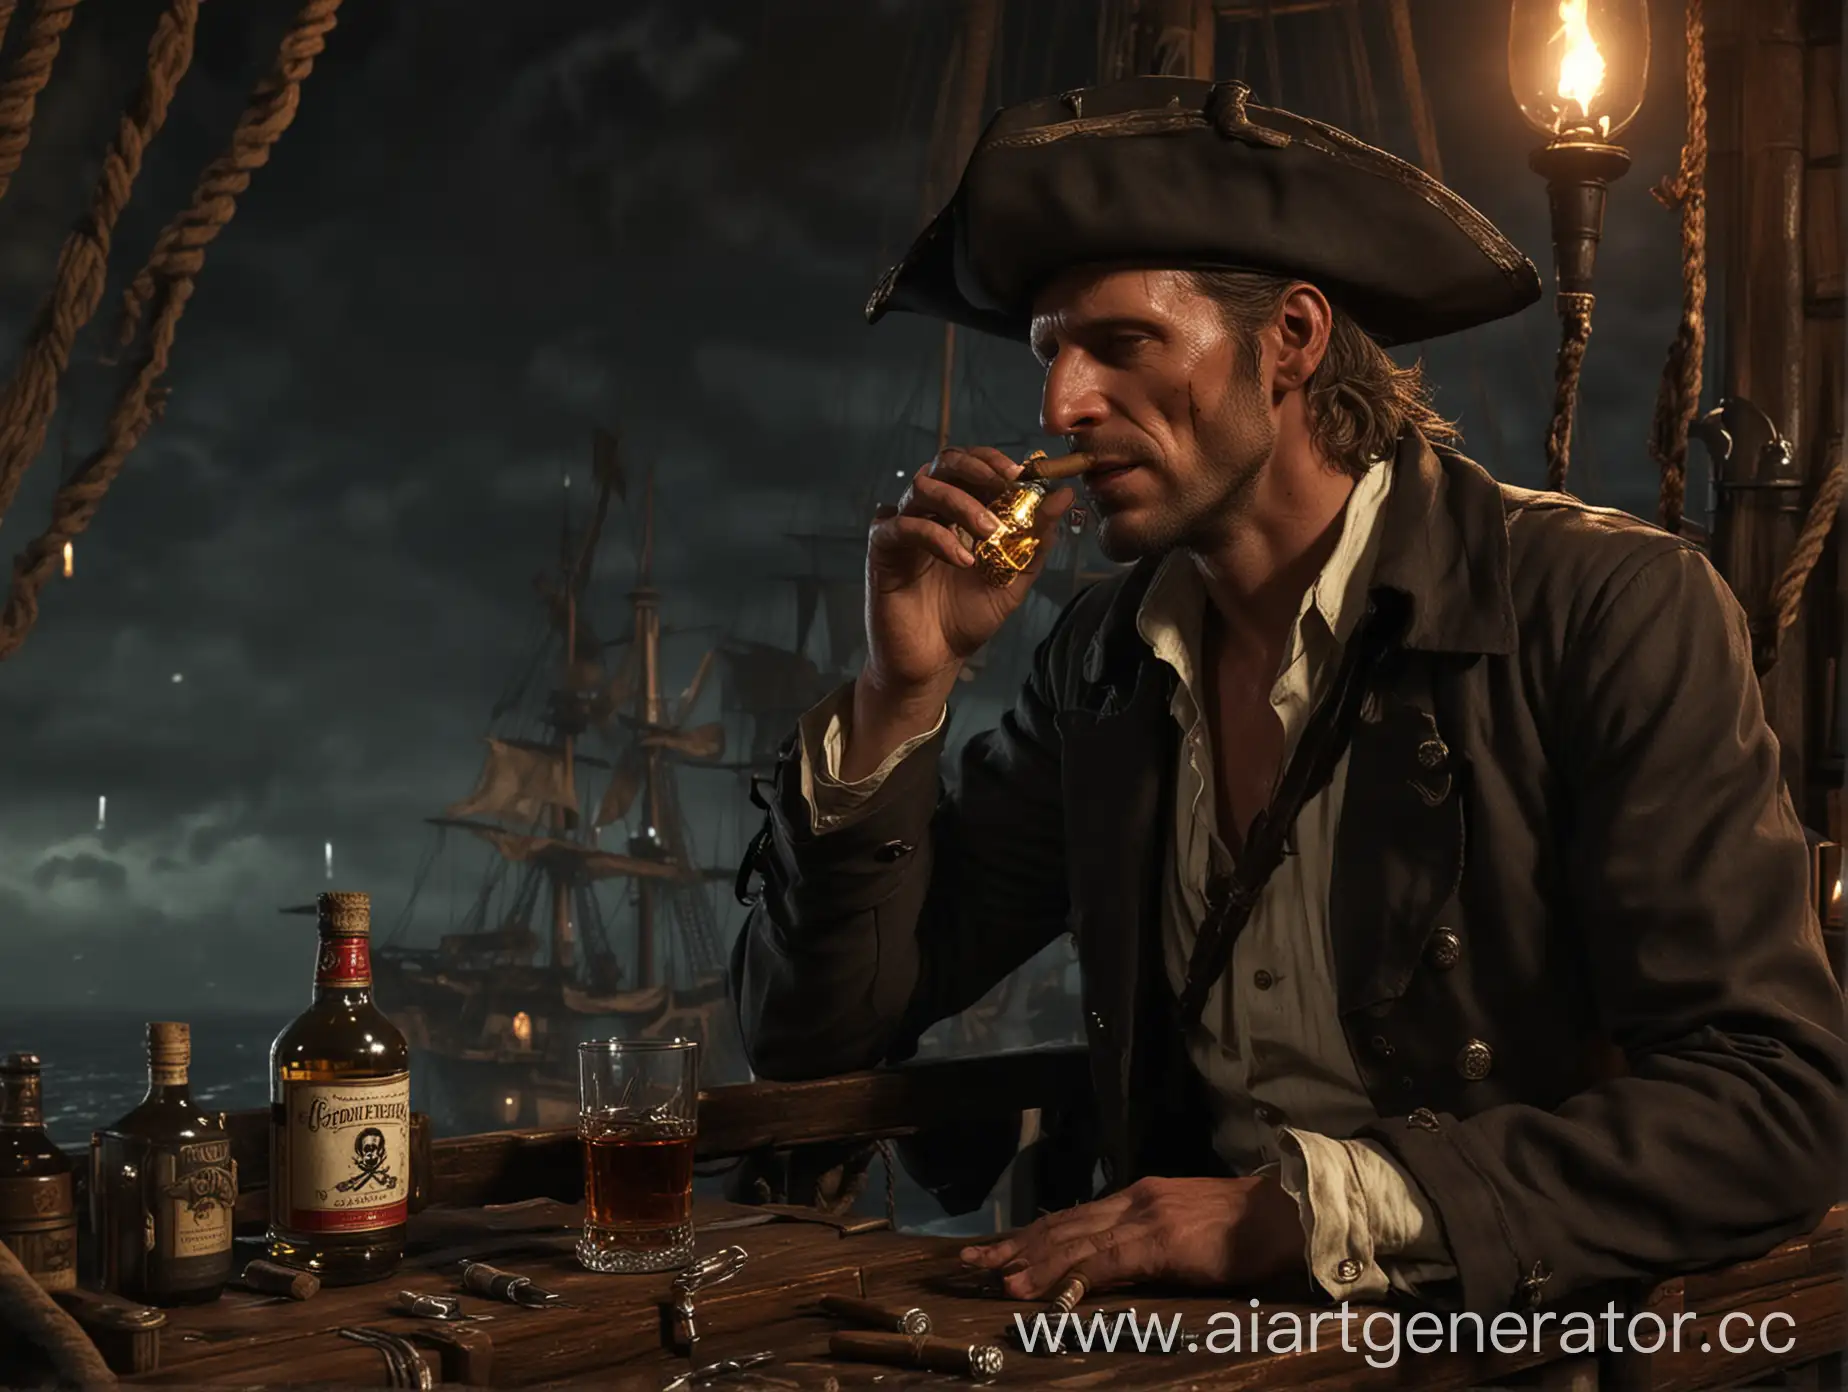 Nick-Valentine-Reflects-on-the-High-Seas-with-Rum-and-Cigars